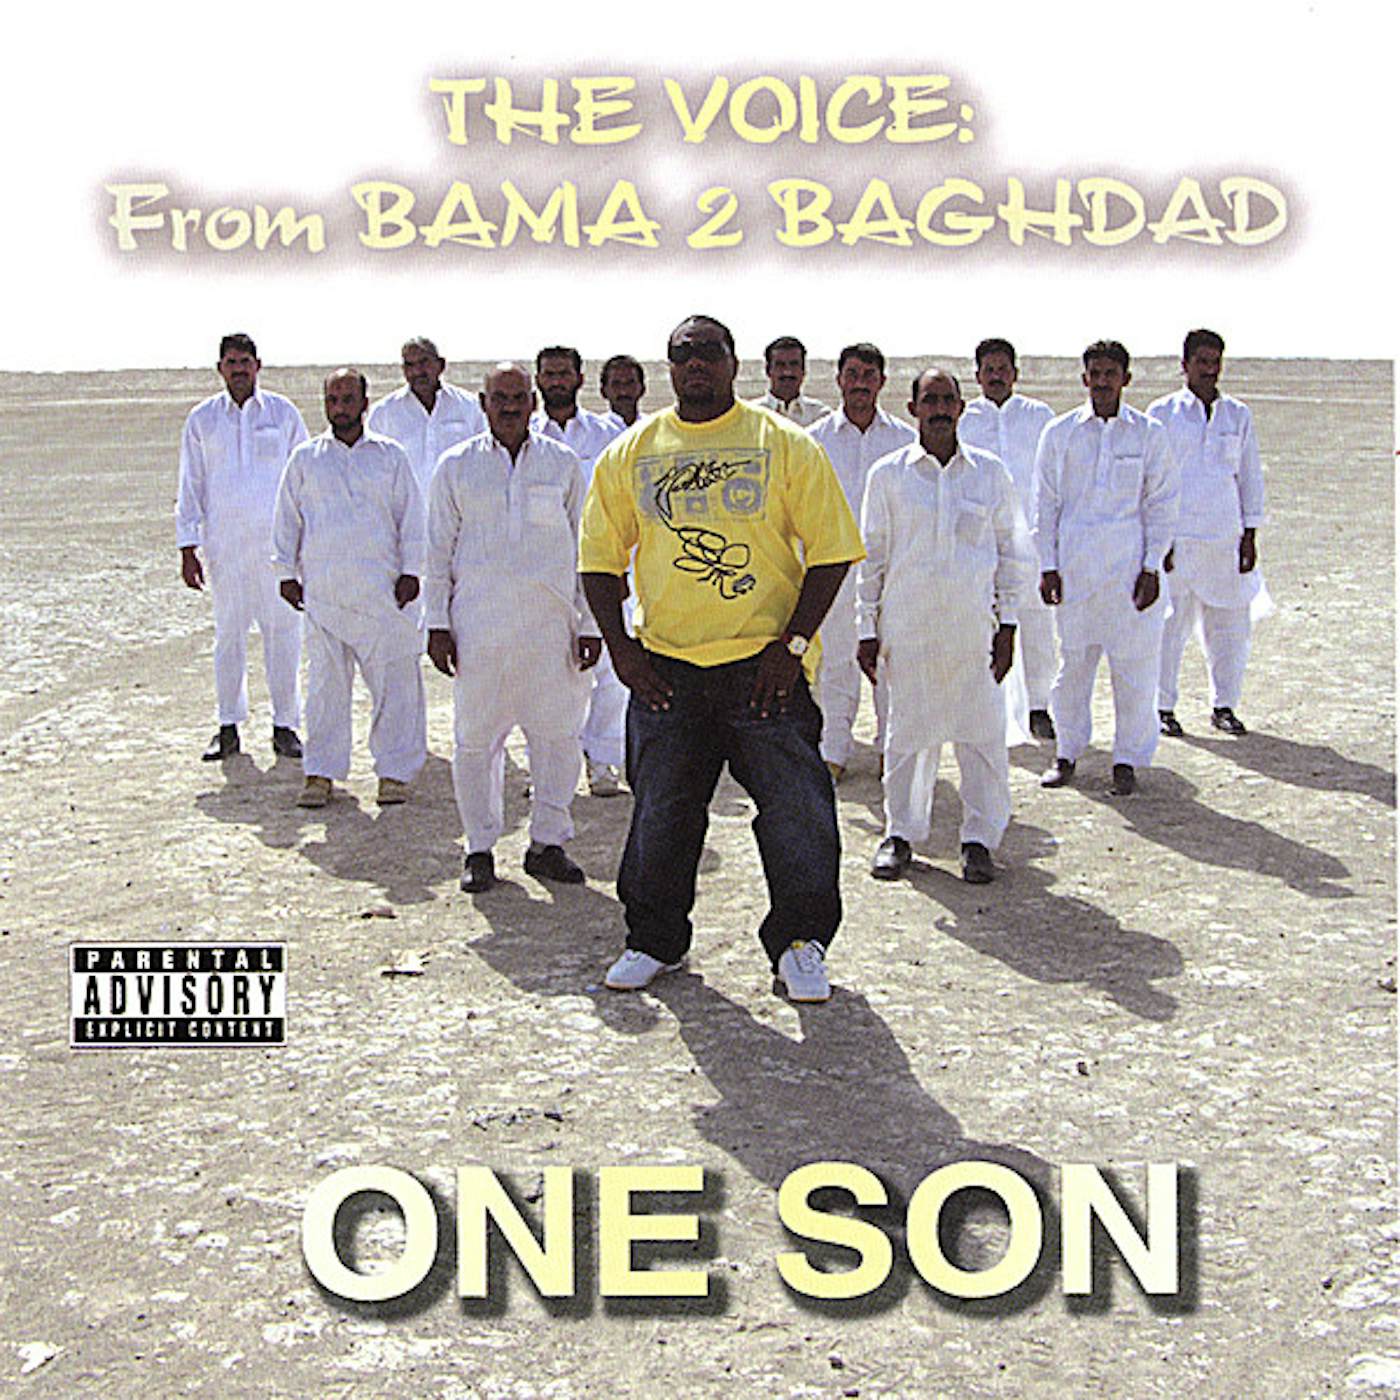 Son One VOICE: FROM BAMA 2 BAGHDAD CD